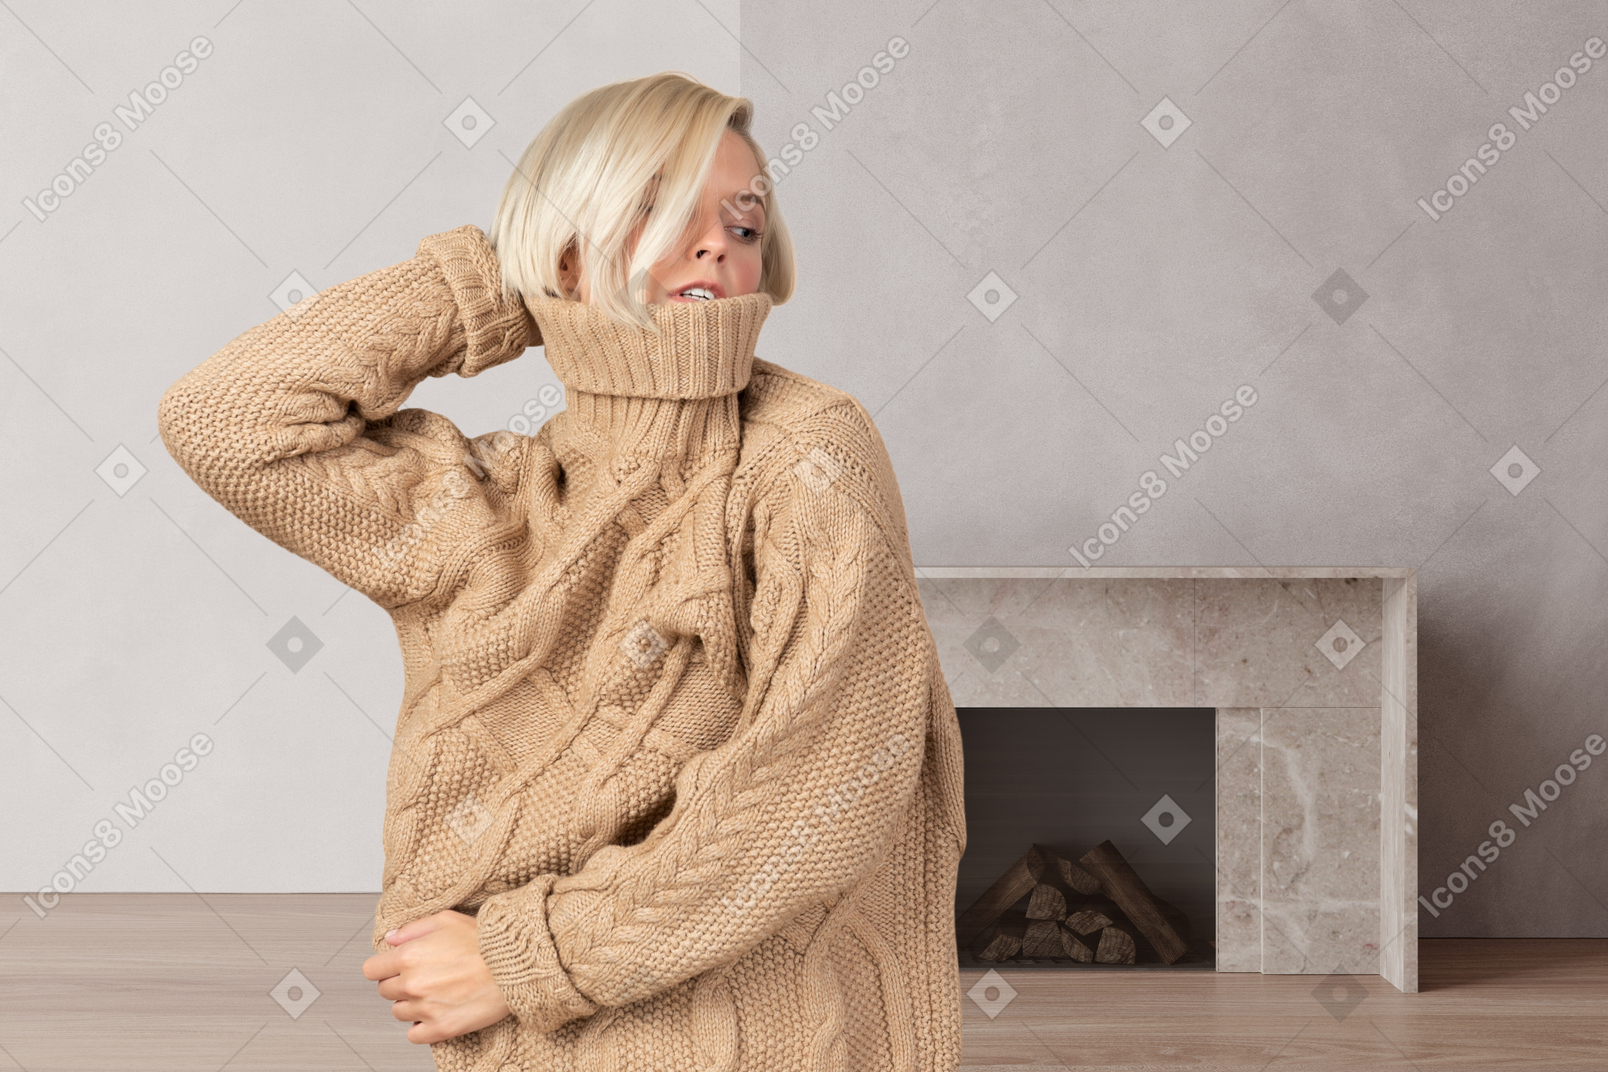 A woman in a turtle neck sweater standing in front of a fireplace